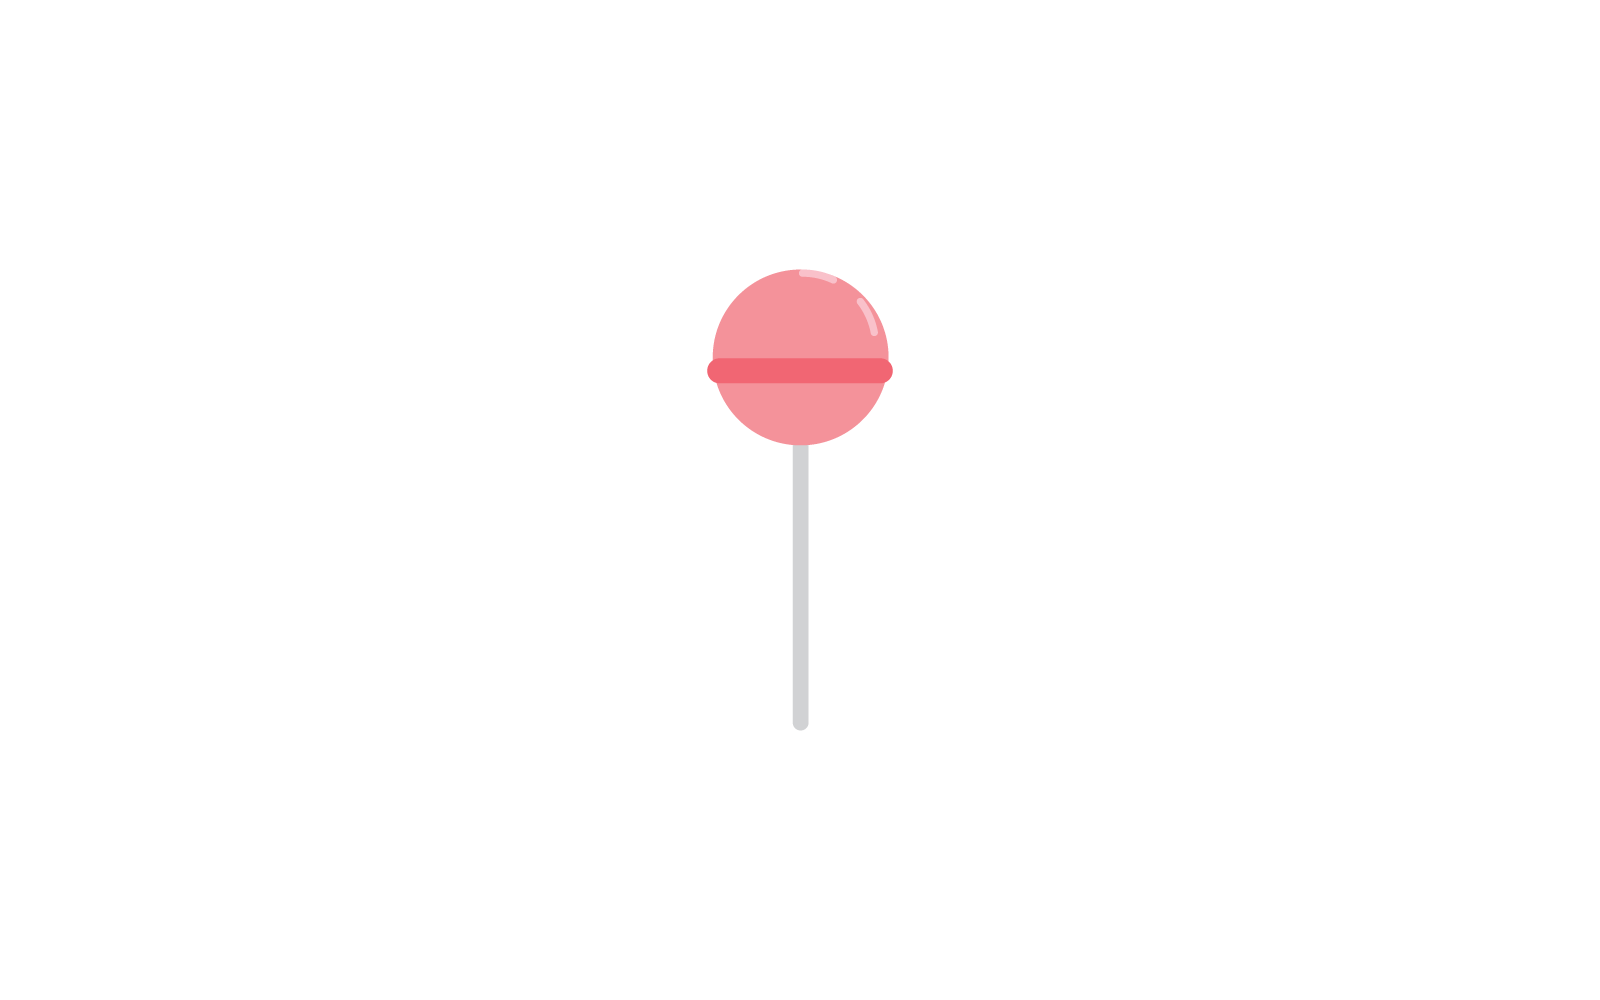 Sweet Candy icon illustration vector design template